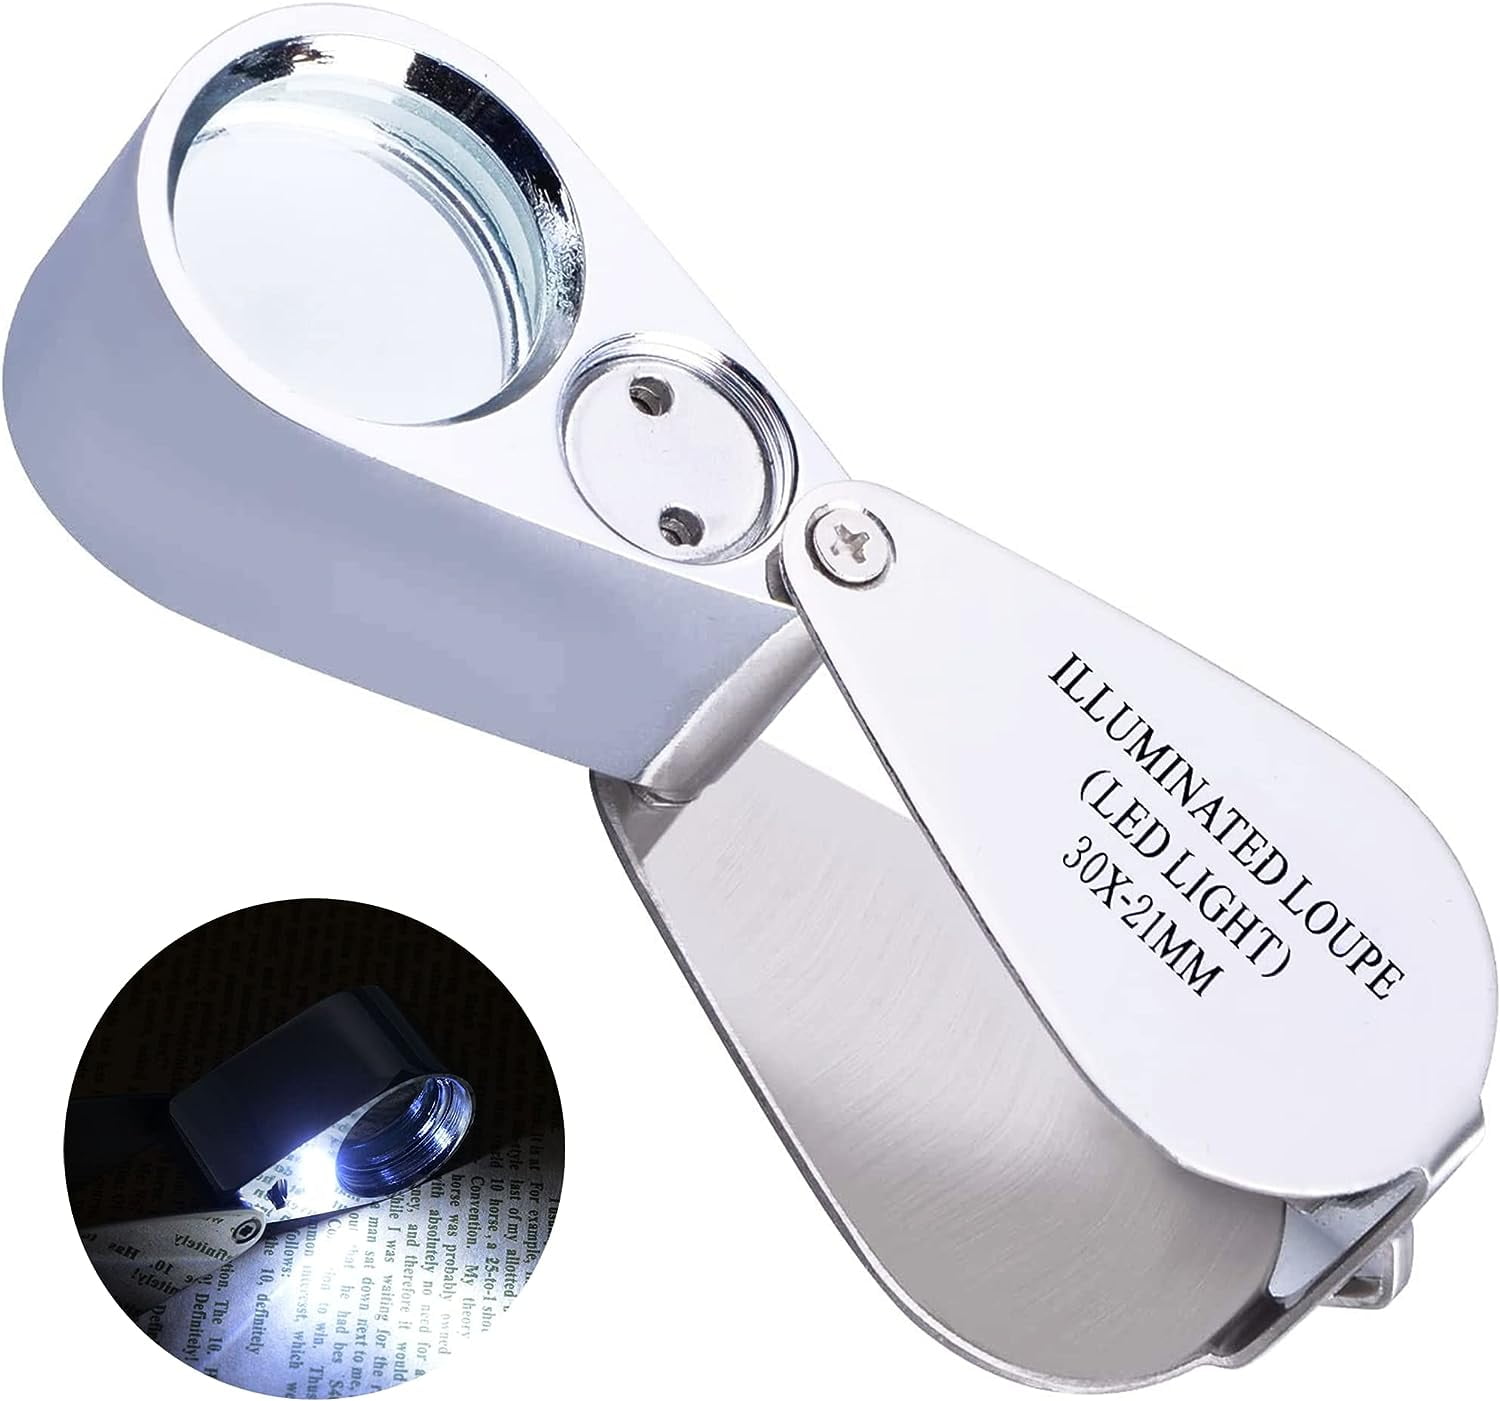 3 times 3X Magnifier Watch Eye Jewelry Loupe Loop Magnifying Tool